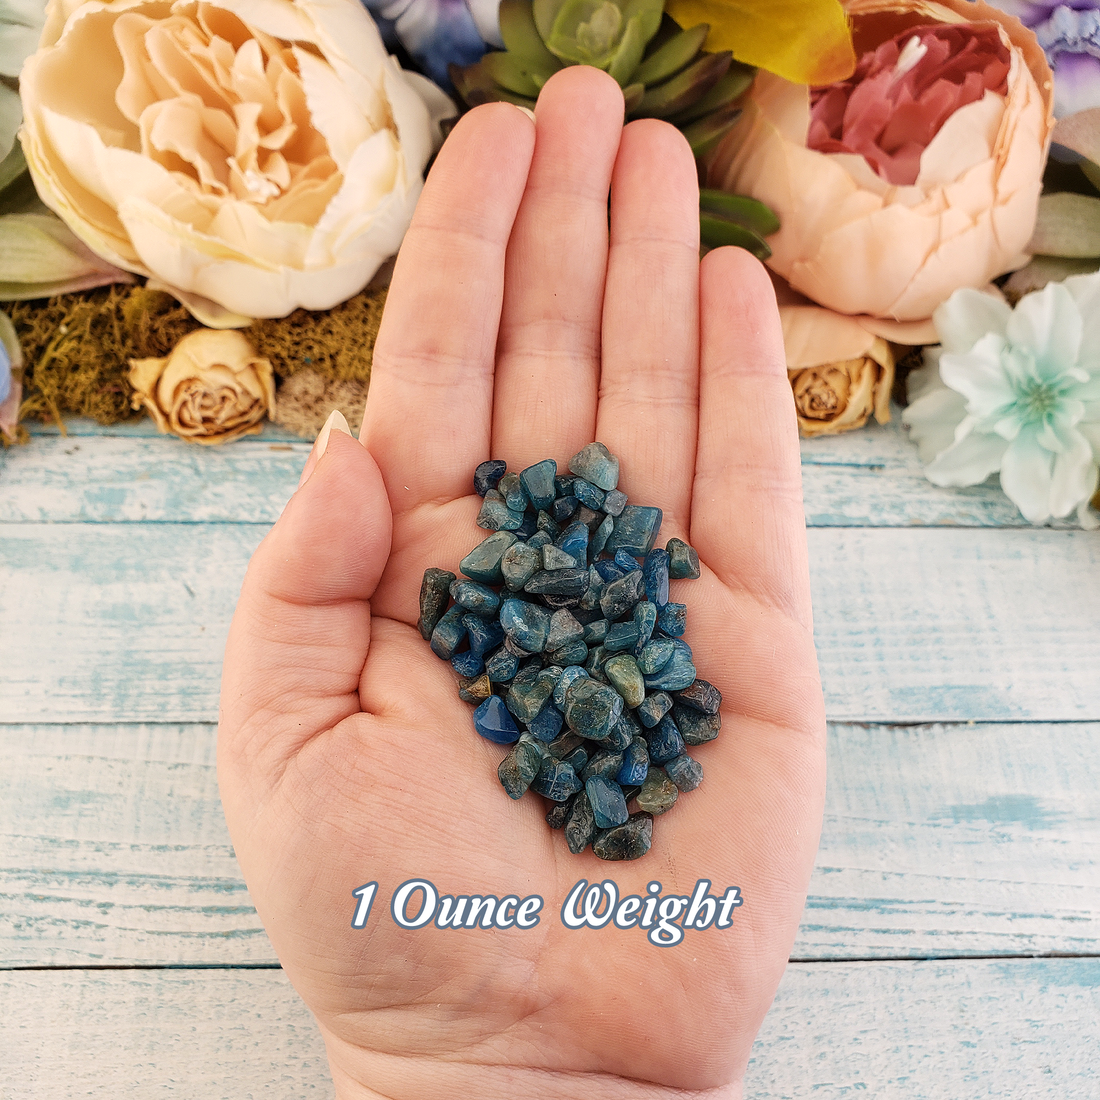 Blue Apatite Natural Crystal Chips - By the Ounce - In Hand One Ounce of Gemstone Chips